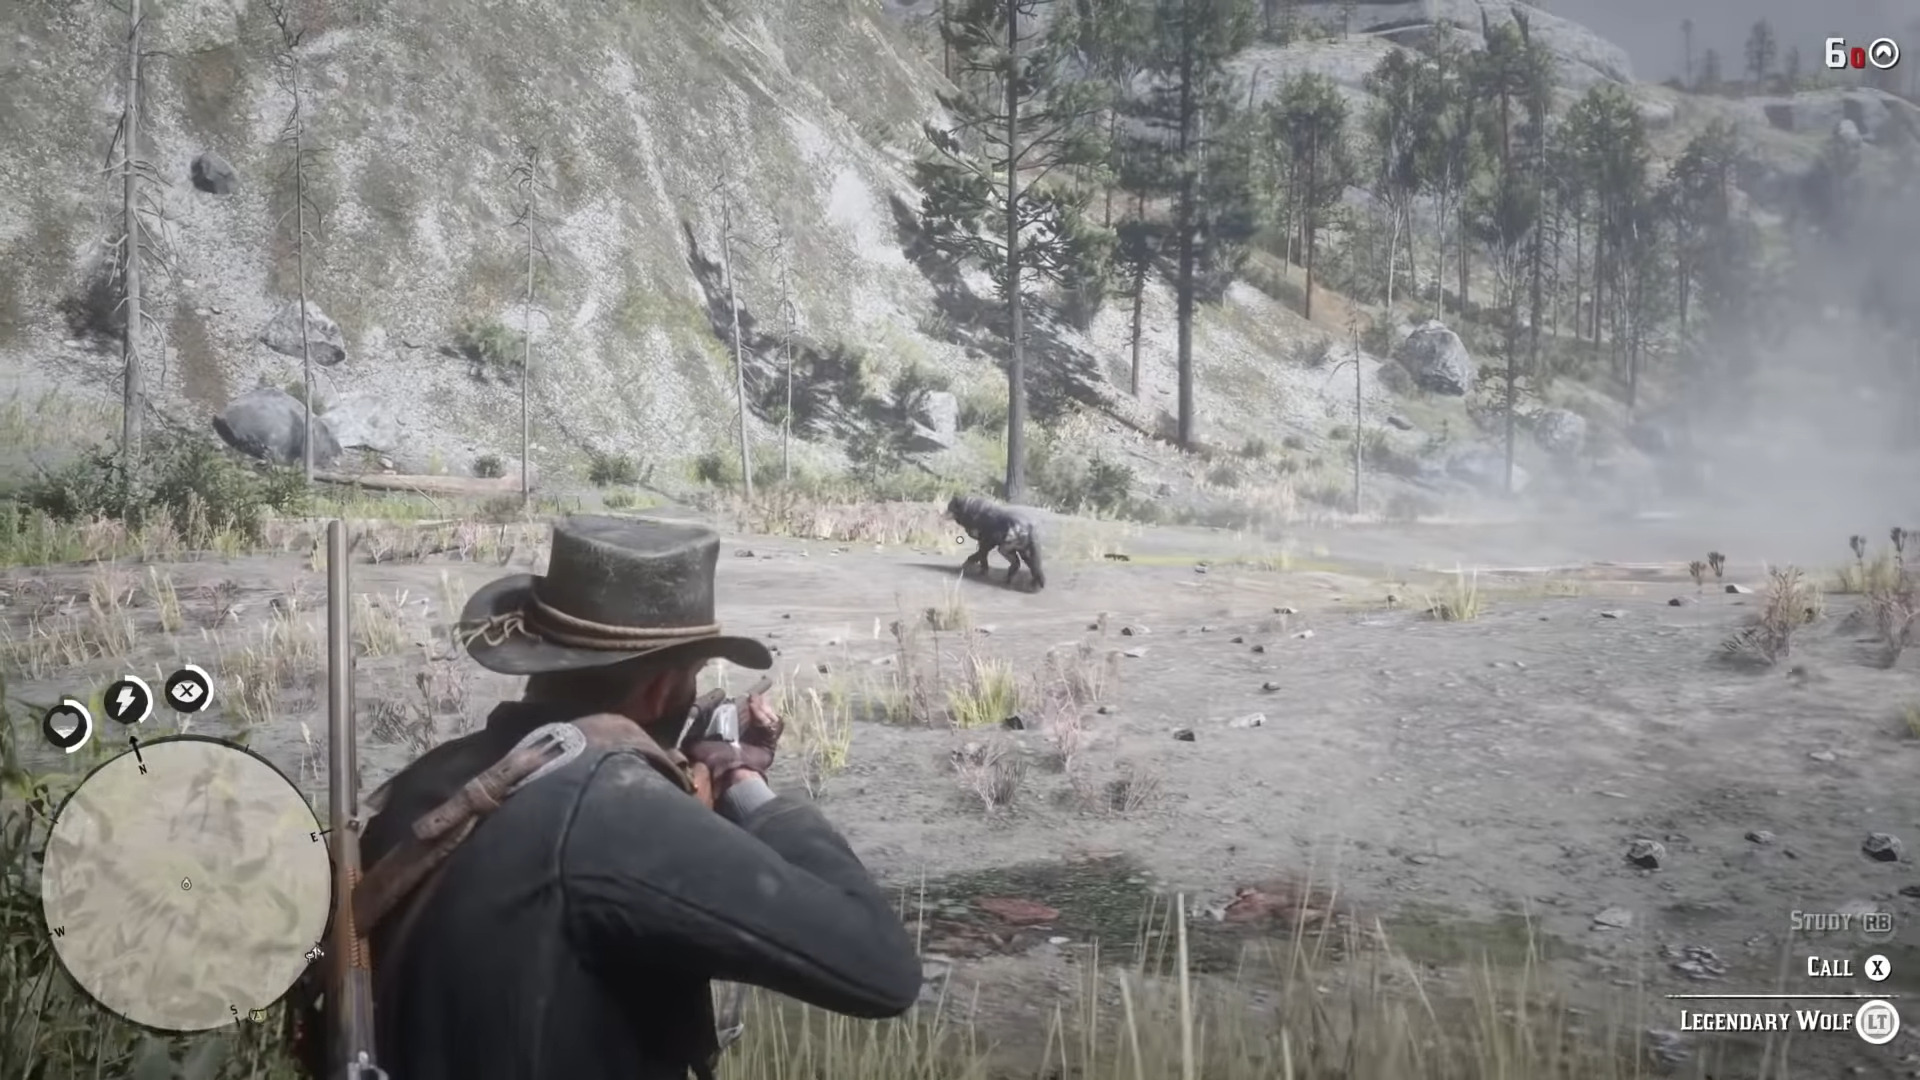 Red Dead Redemption 2: All Legendary Animals (Excluding Fish) Available To Hunt And Skin